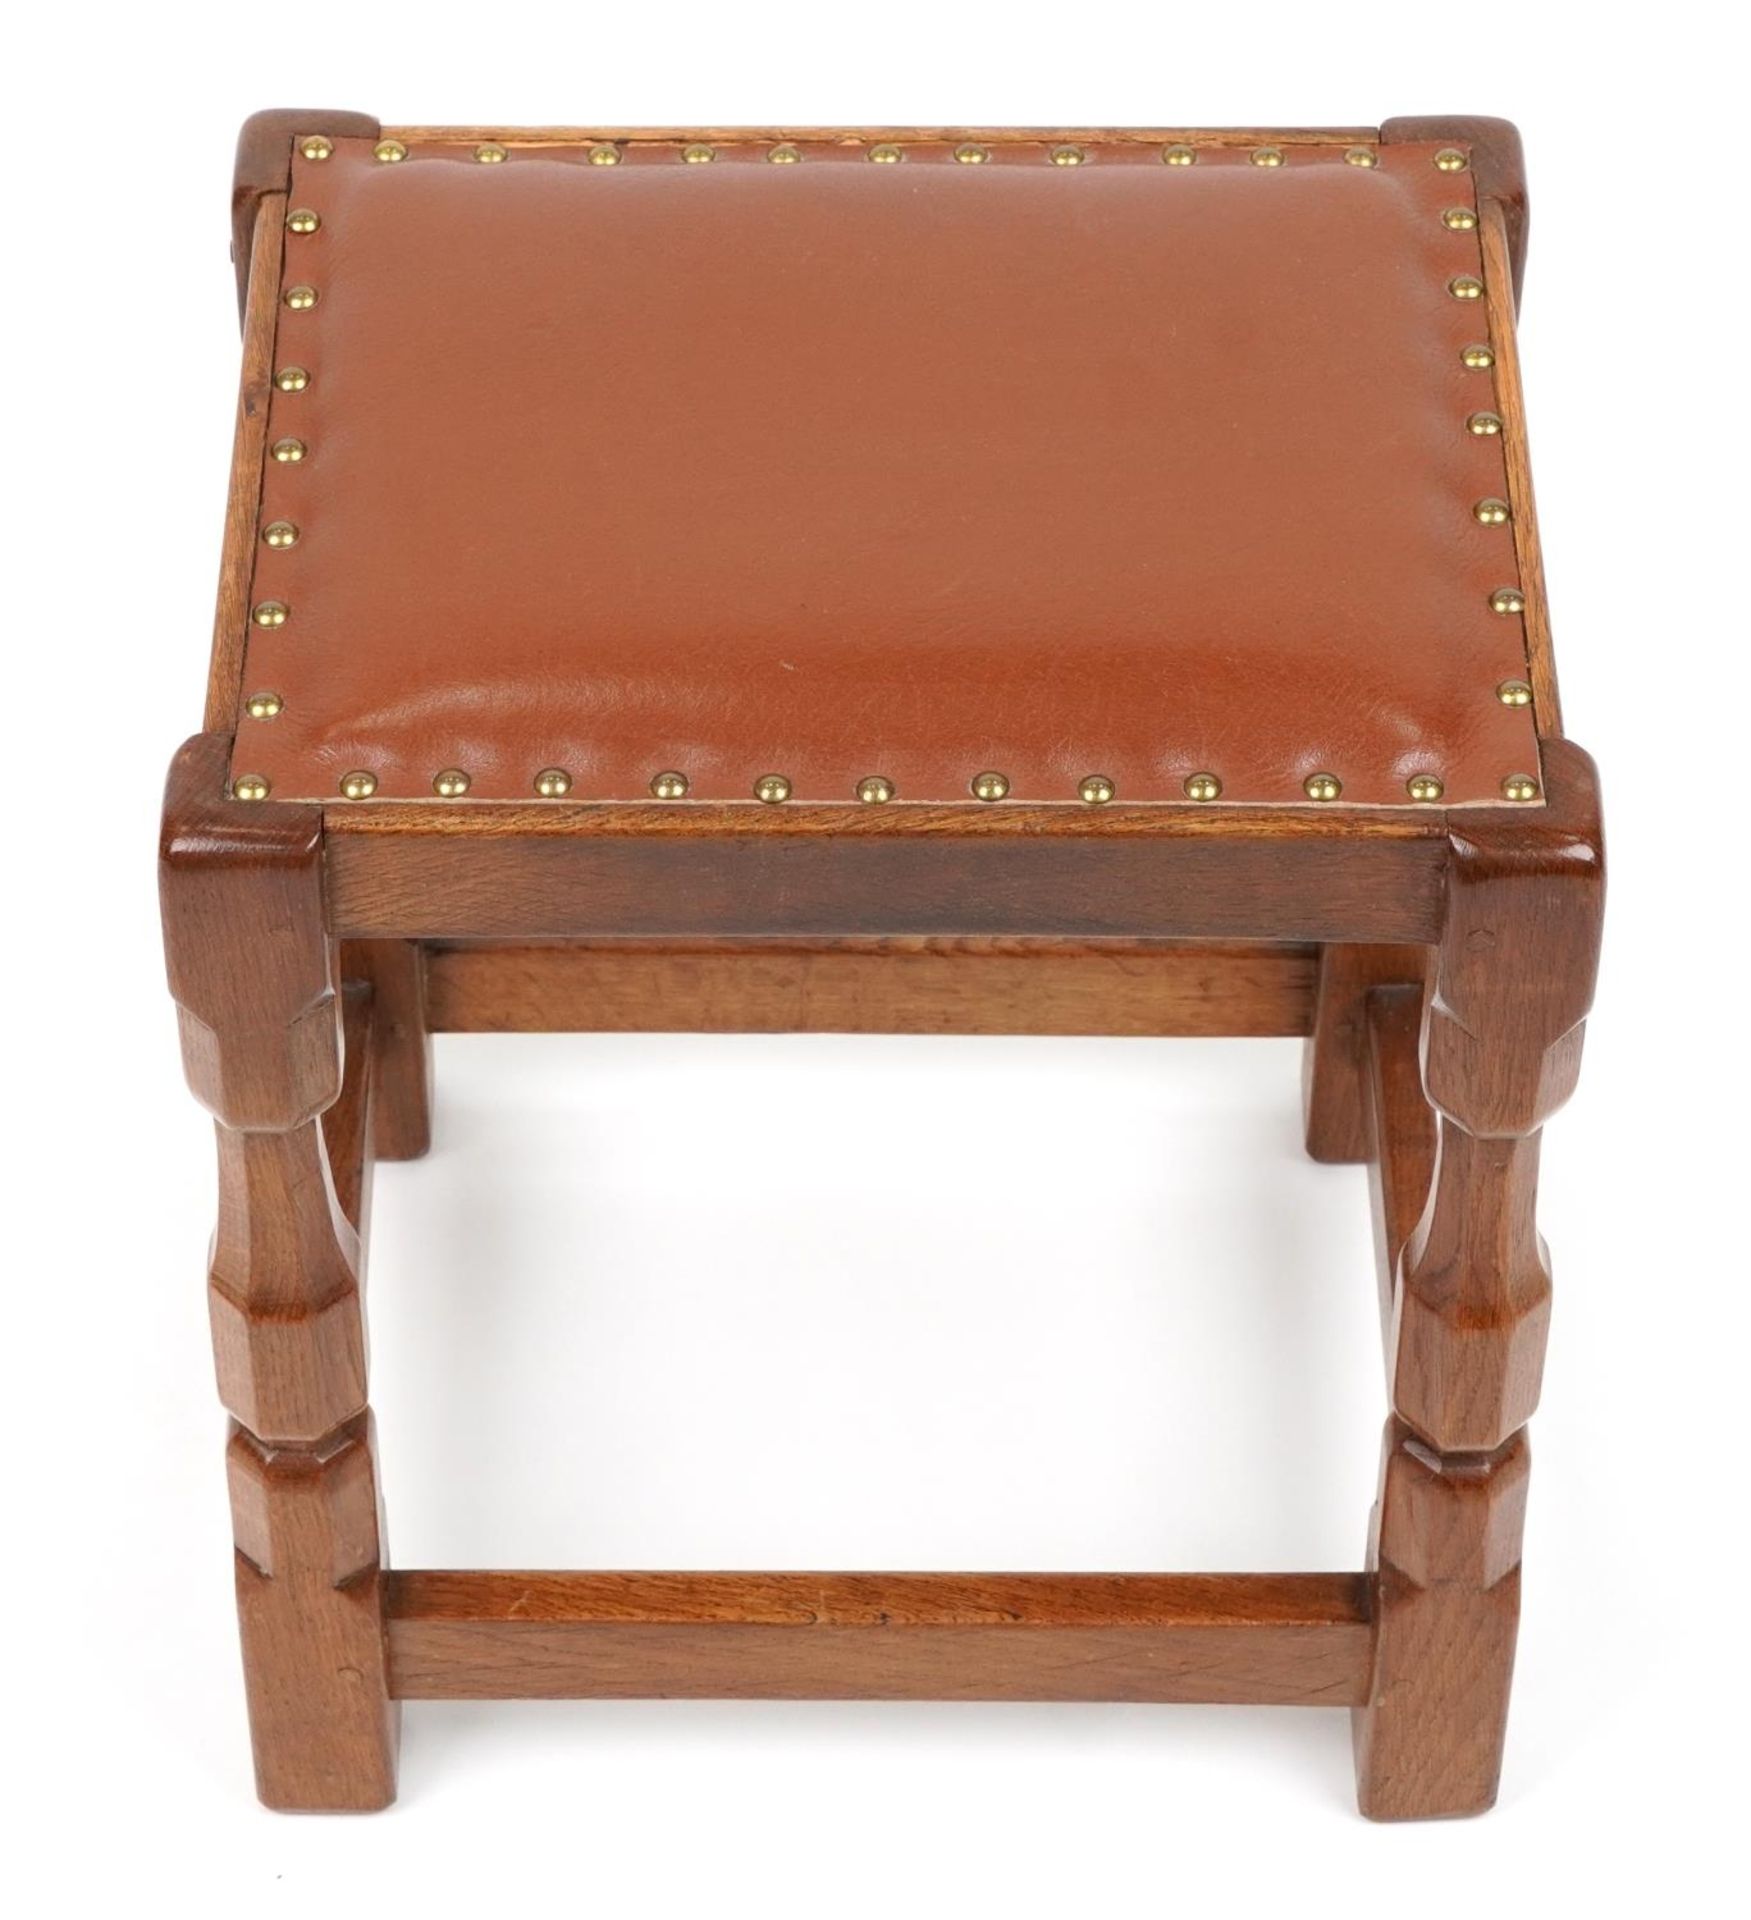 Syd Pollard, Arts & Crafts oak stool with brown leather upholstered seat, 45cm H x 40cm W x 32cm D : - Image 2 of 3